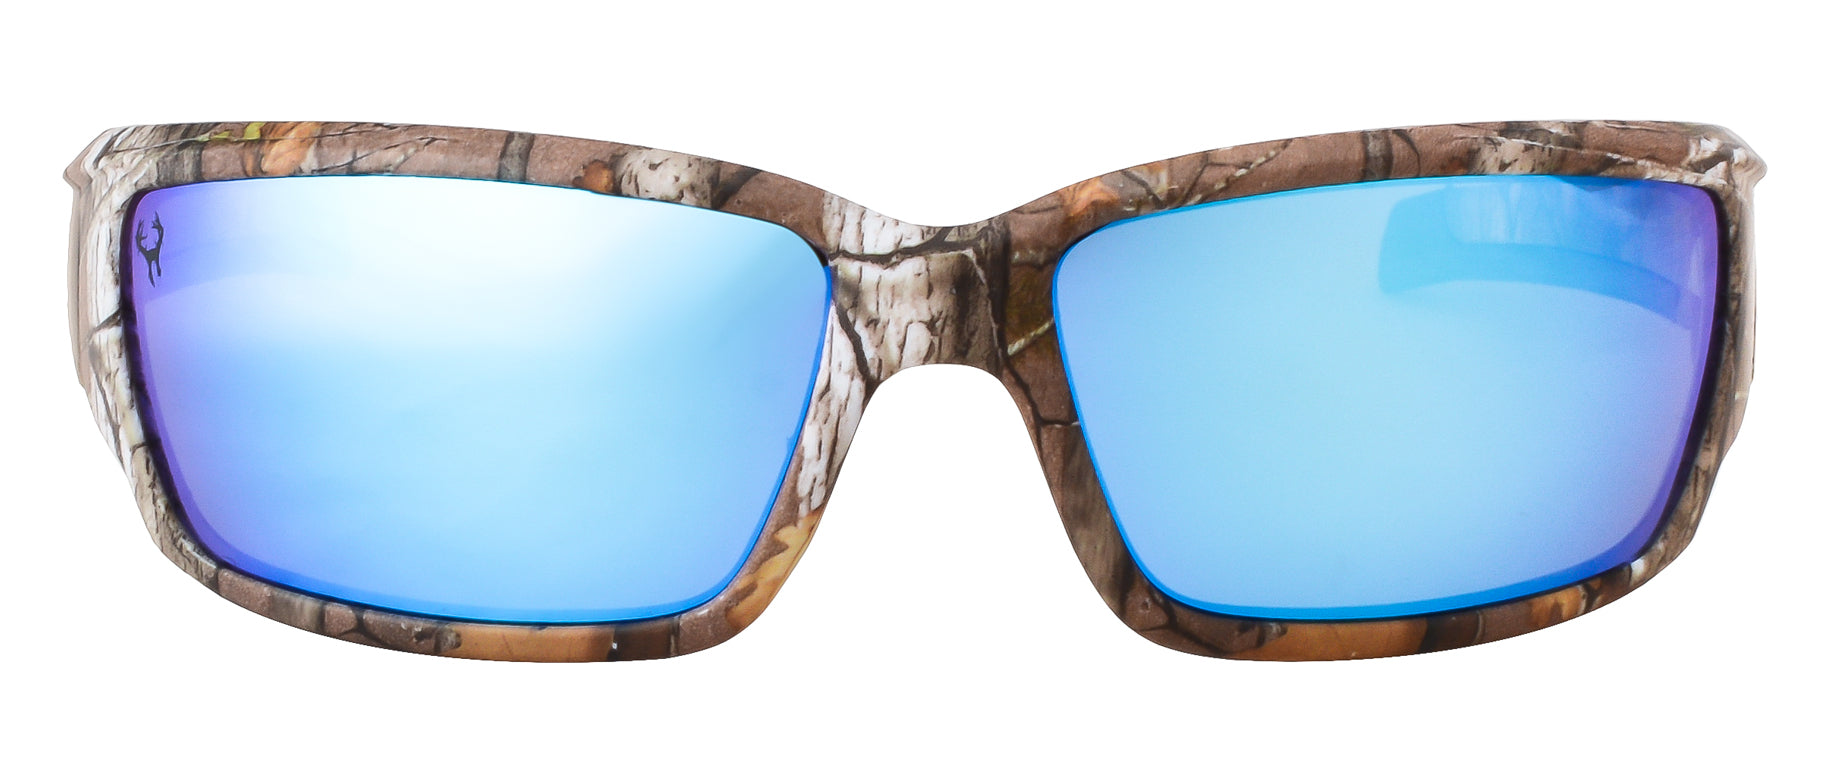 Third image: Hornz Brown Forest Camouflage Polarized Sunglasses for Men Full Frame Strong Arms & Free Matching Microfiber Pouch – Brown Camo Frame – Blue Lens